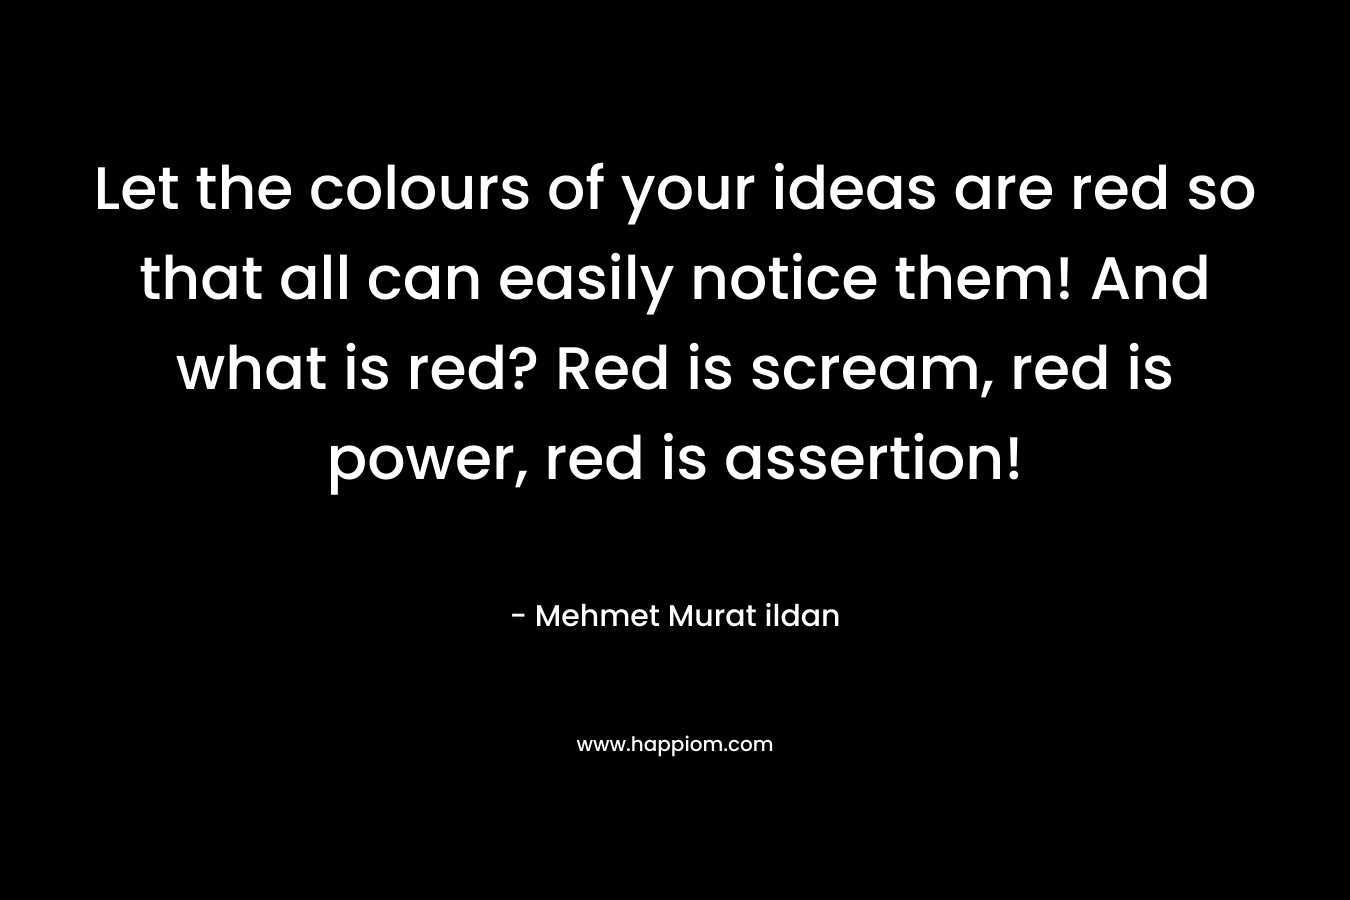 Let the colours of your ideas are red so that all can easily notice them! And what is red? Red is scream, red is power, red is assertion! – Mehmet Murat ildan